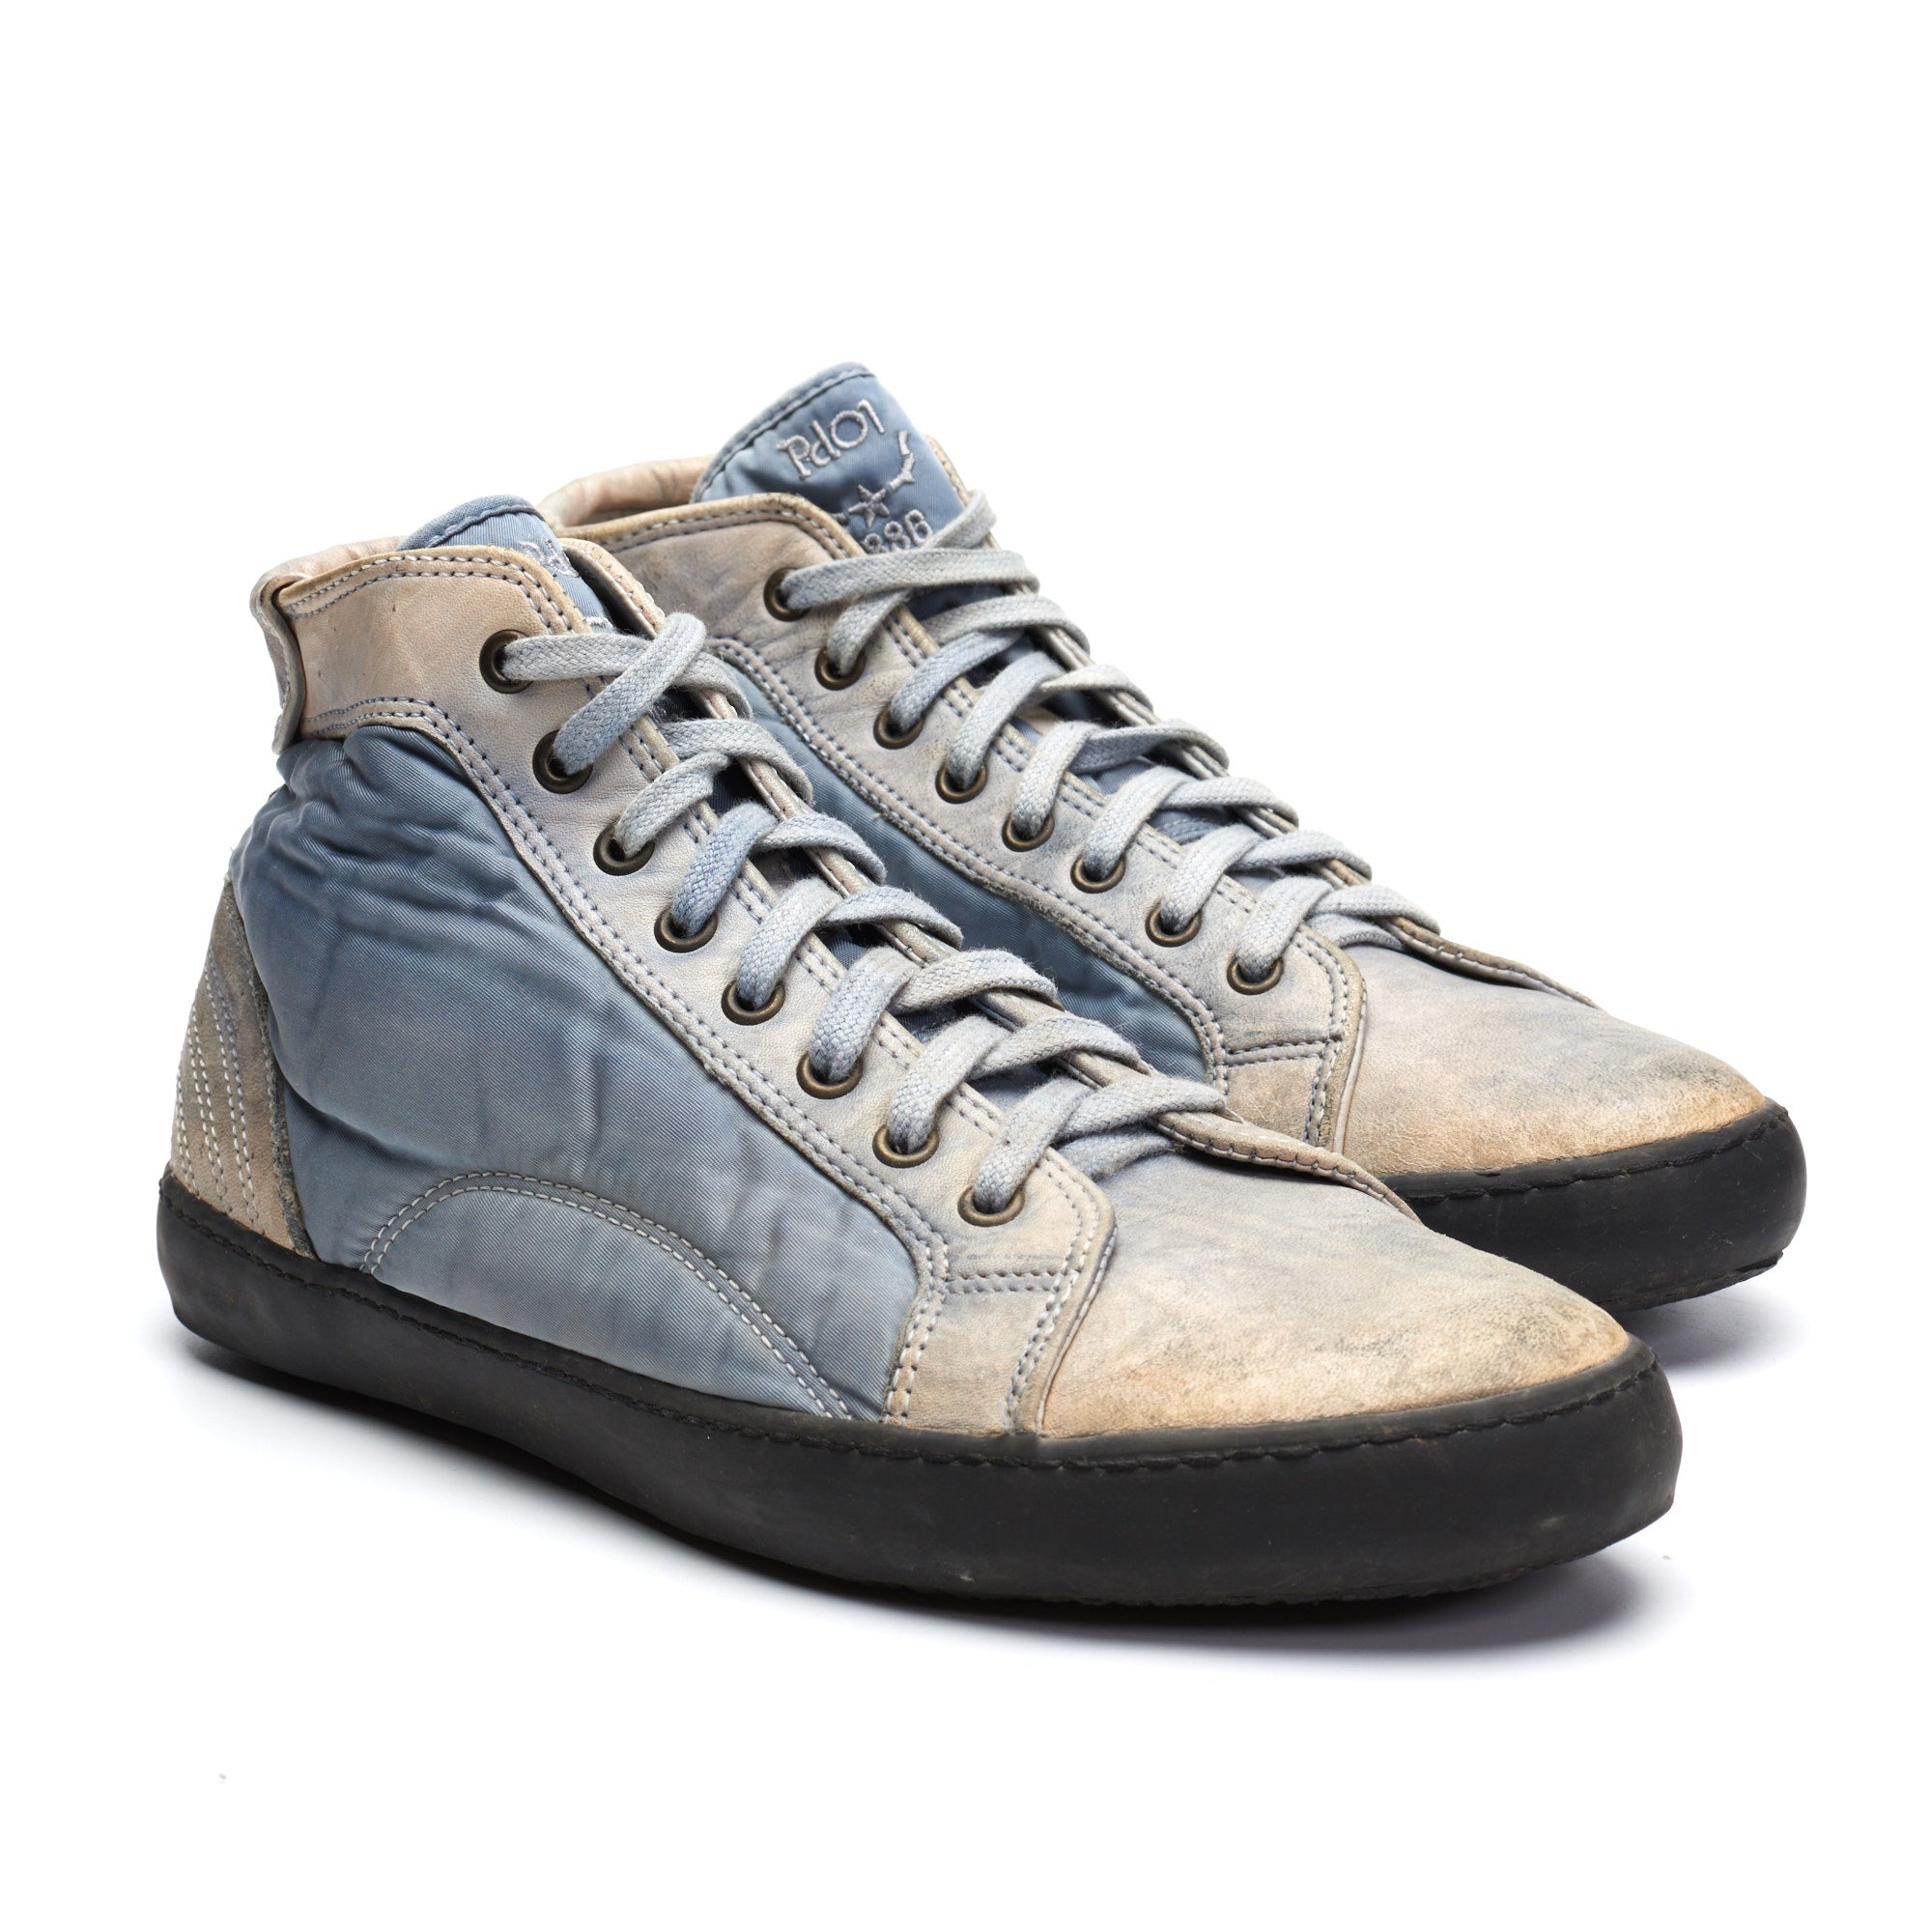 PANTOFOLA D'ORO Super Star Extra Gray Leather High Top Sneakers Shoes EU 43 US 10